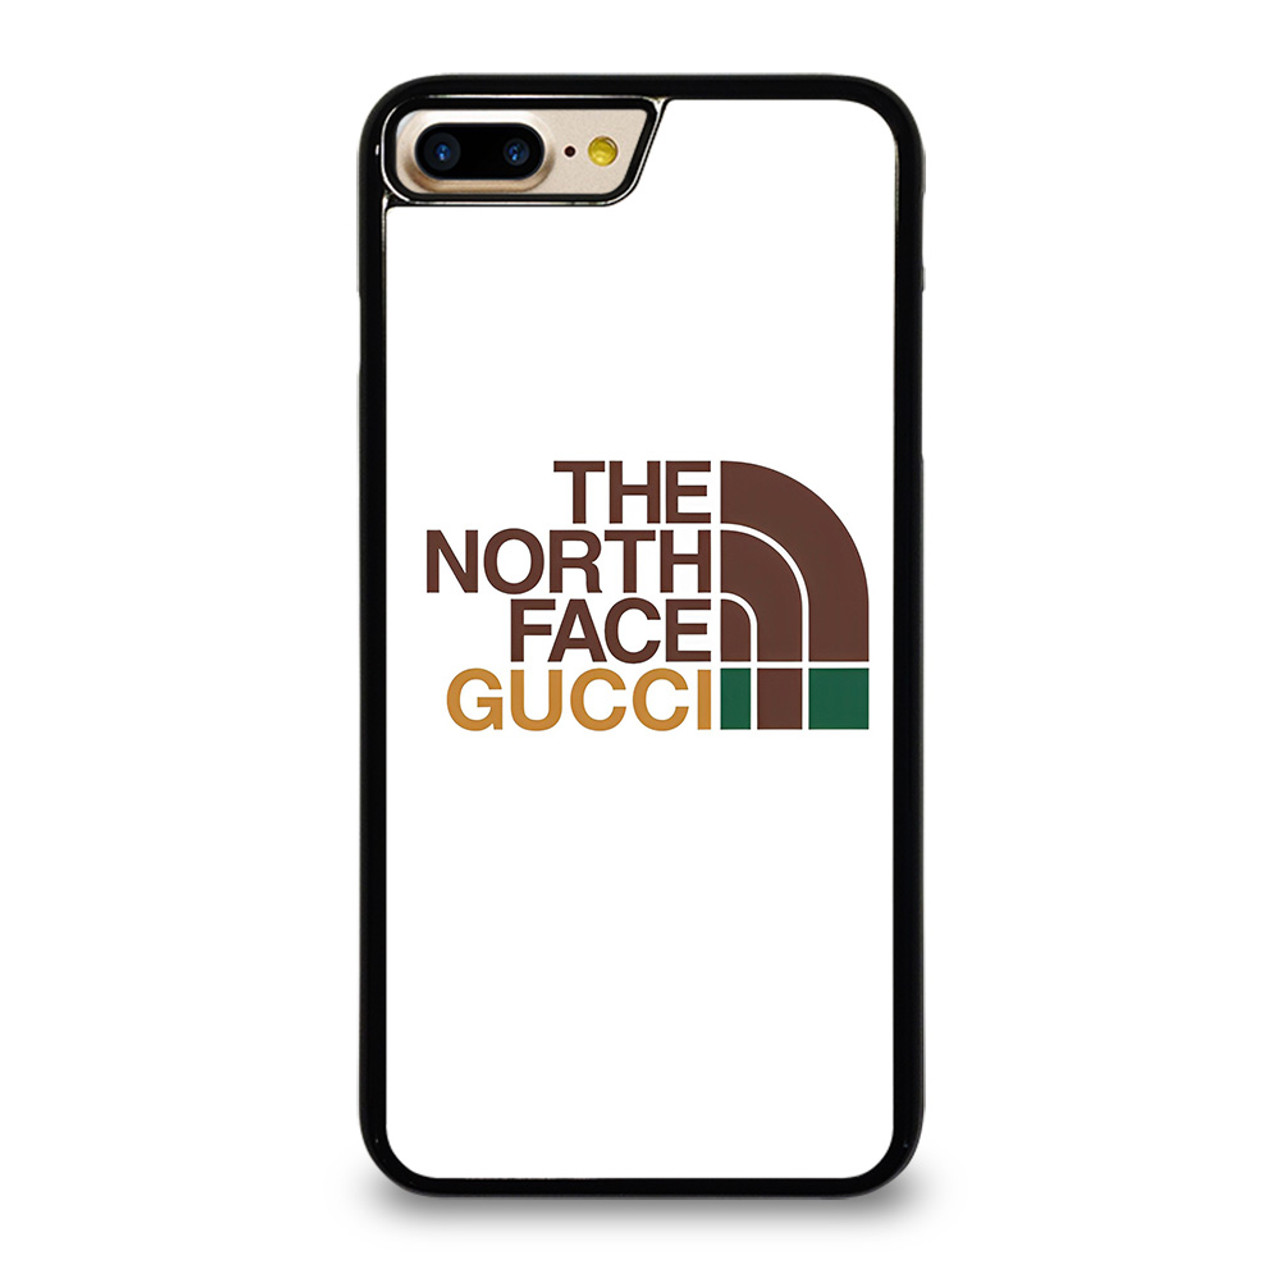 THE NORTH iPhone 7 Plus Case Cover